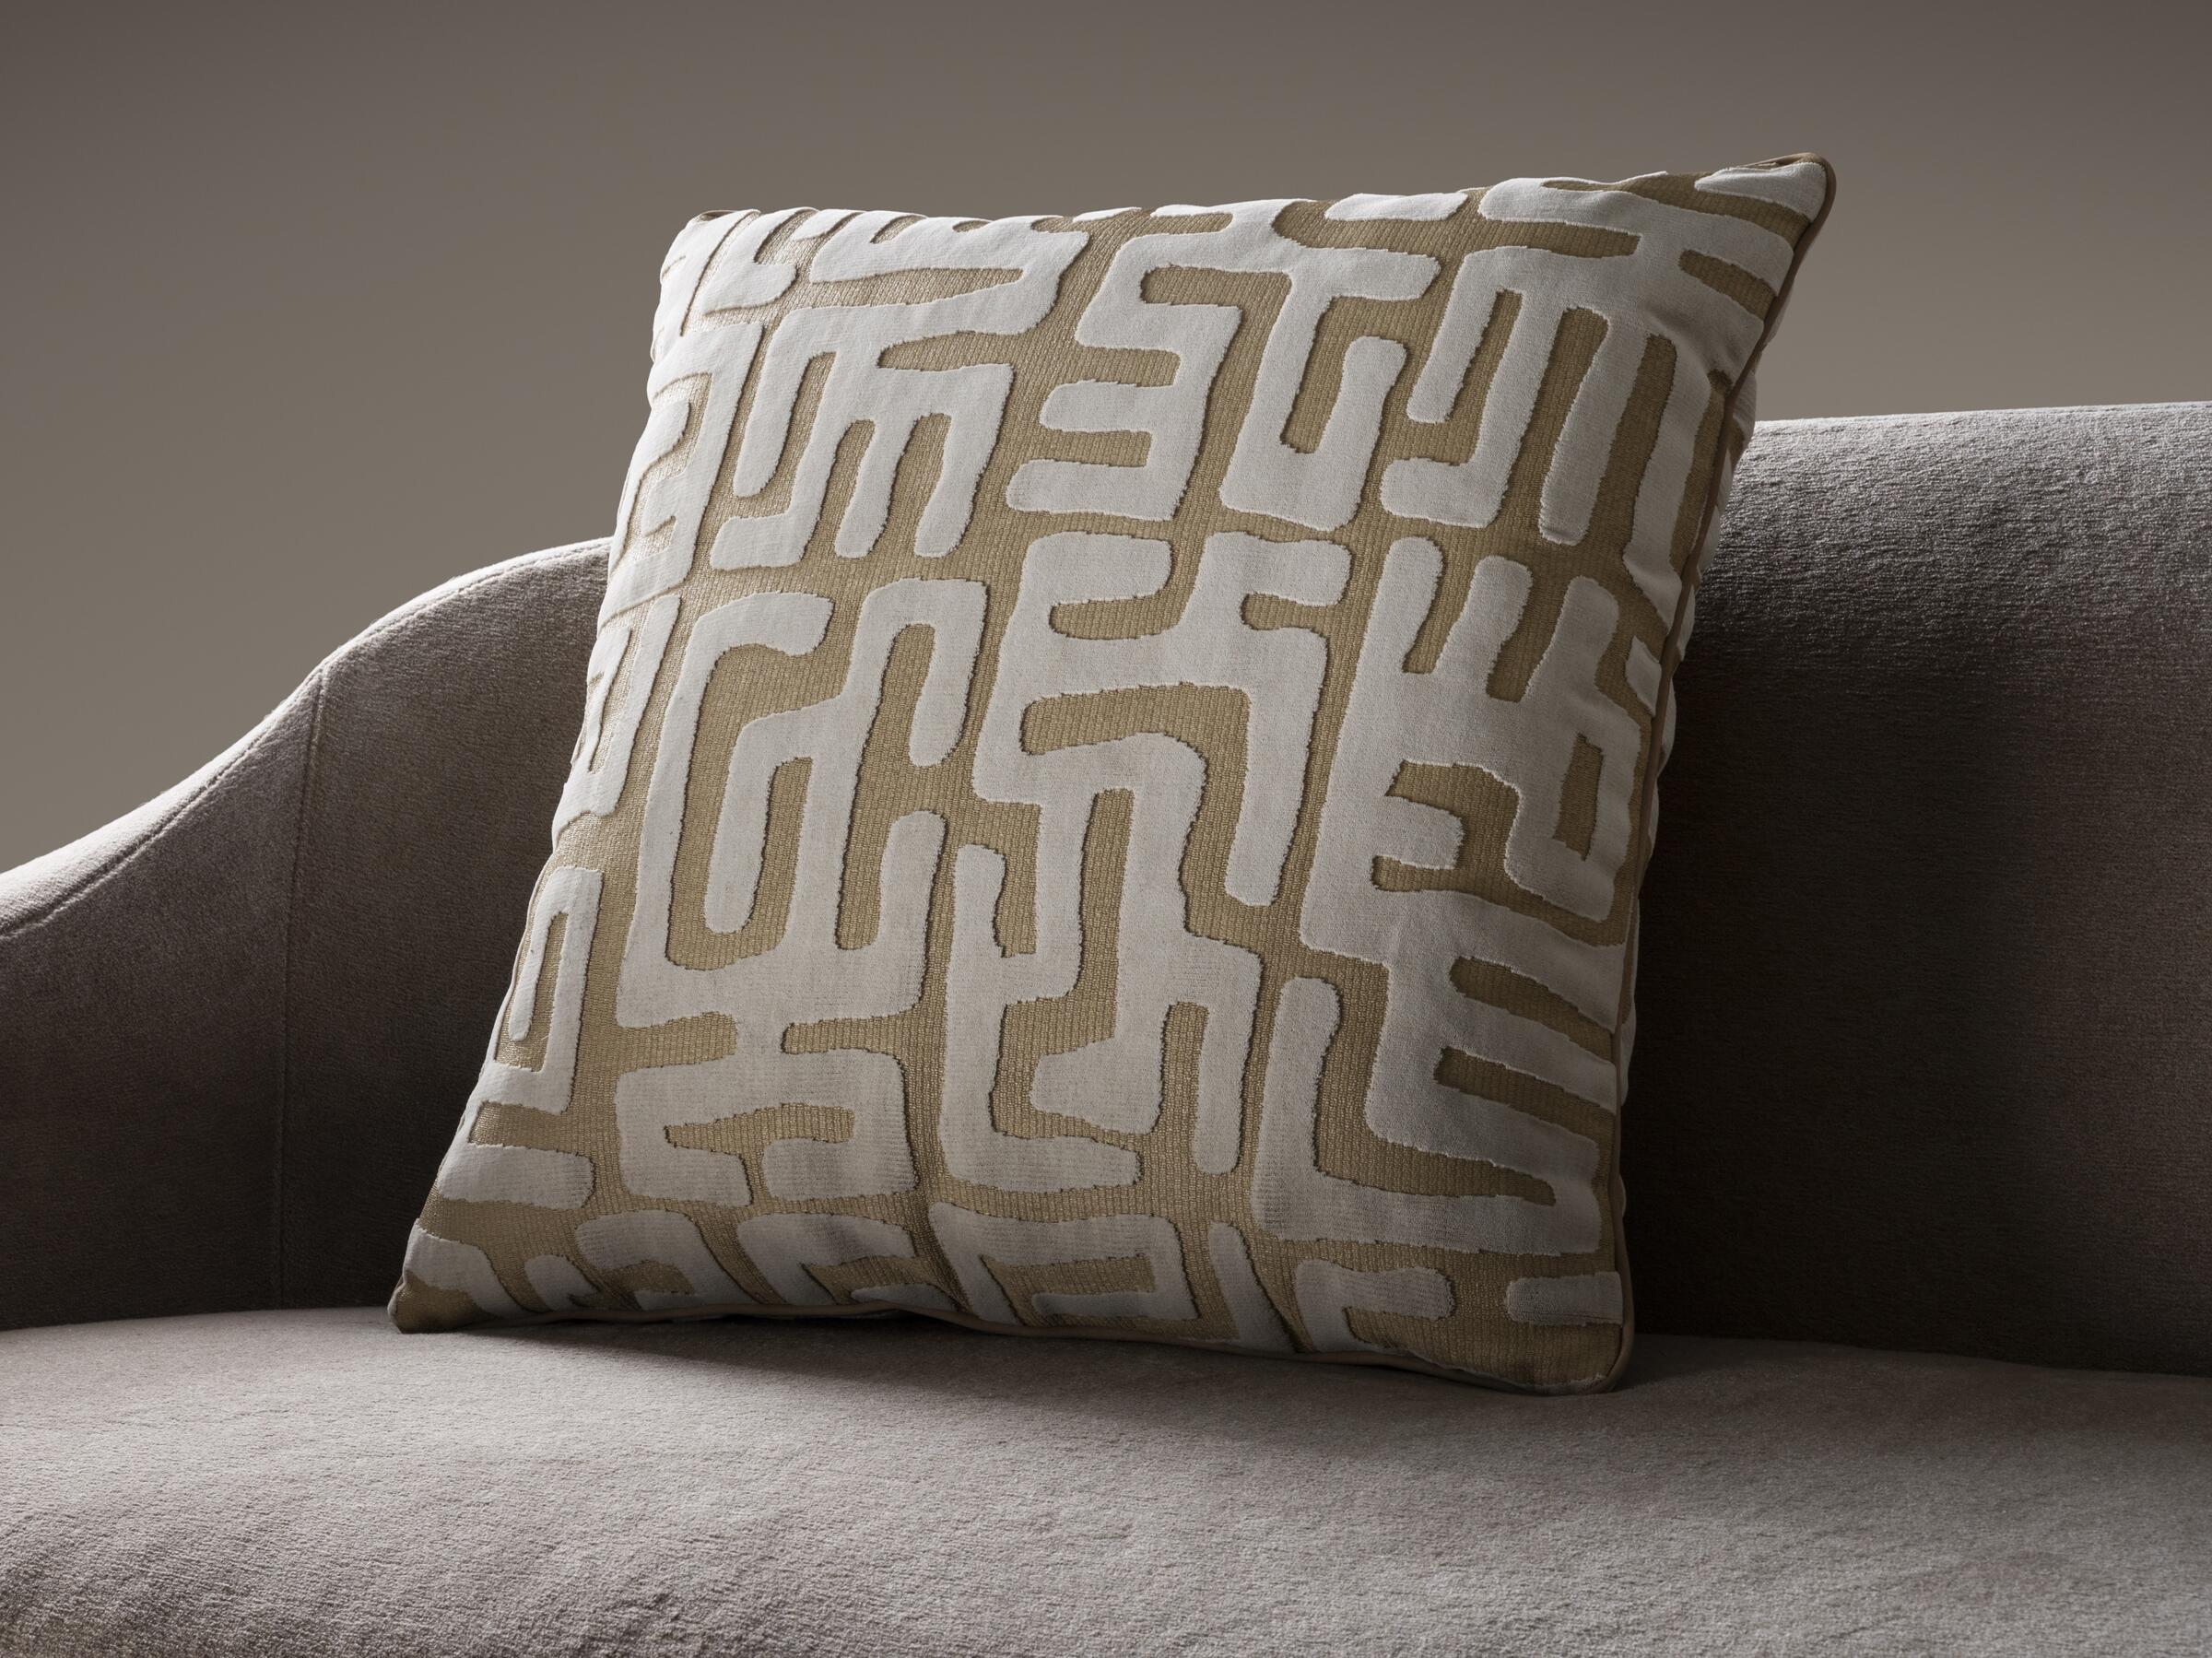 Throw Pillow, 22 x 22 in, Crack The Code: Turmeric